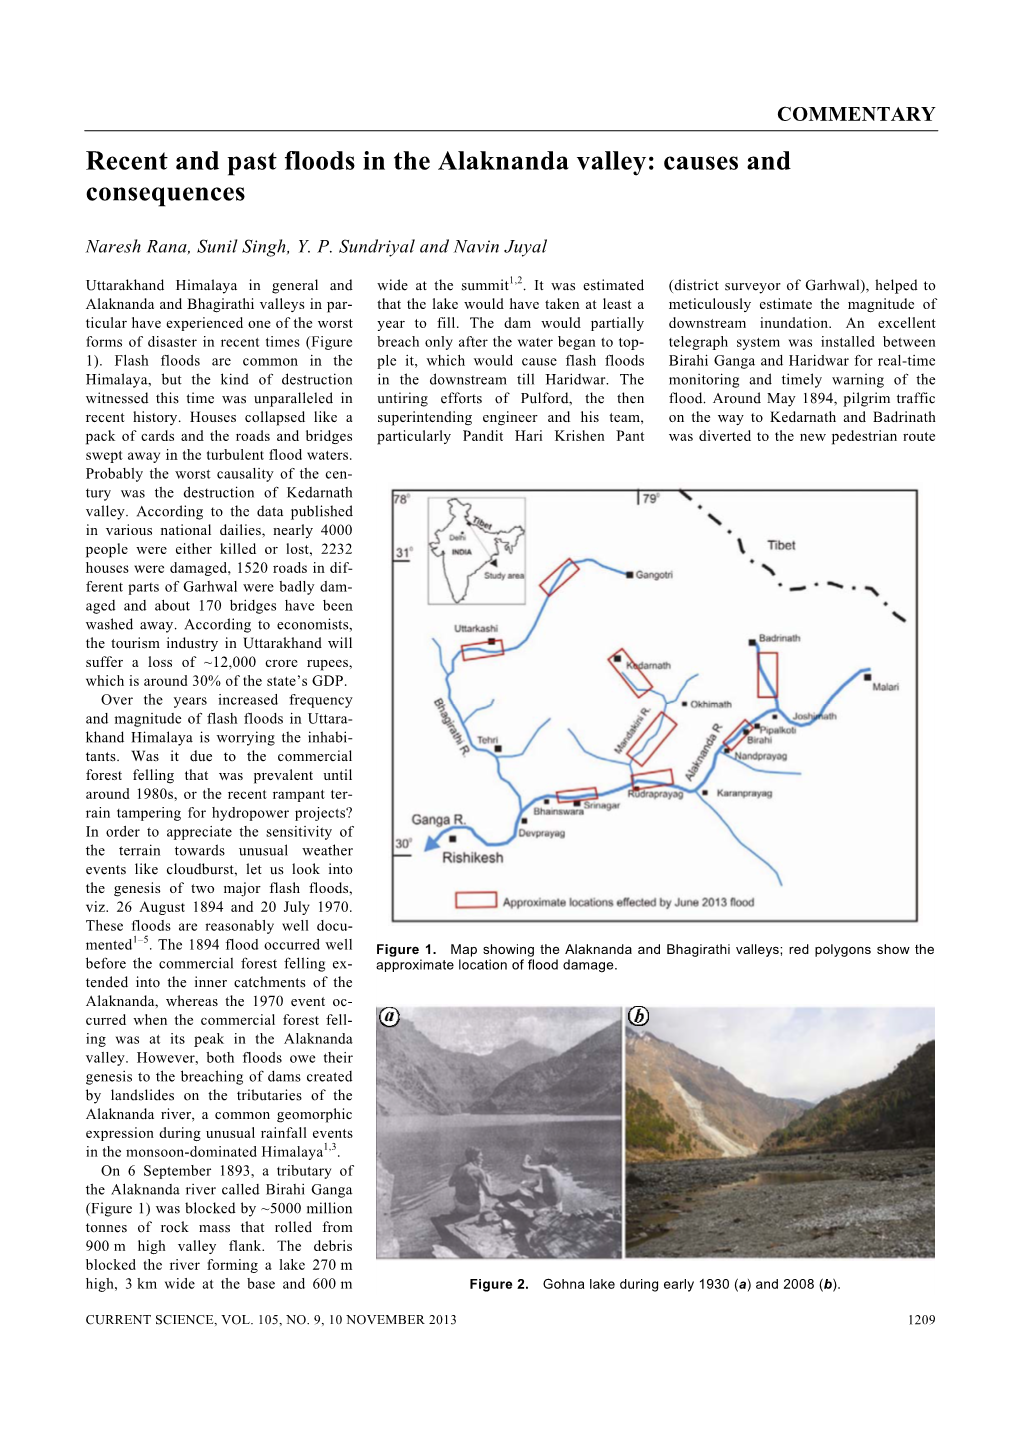 Recent and Past Floods in the Alaknanda Valley: Causes and Consequences